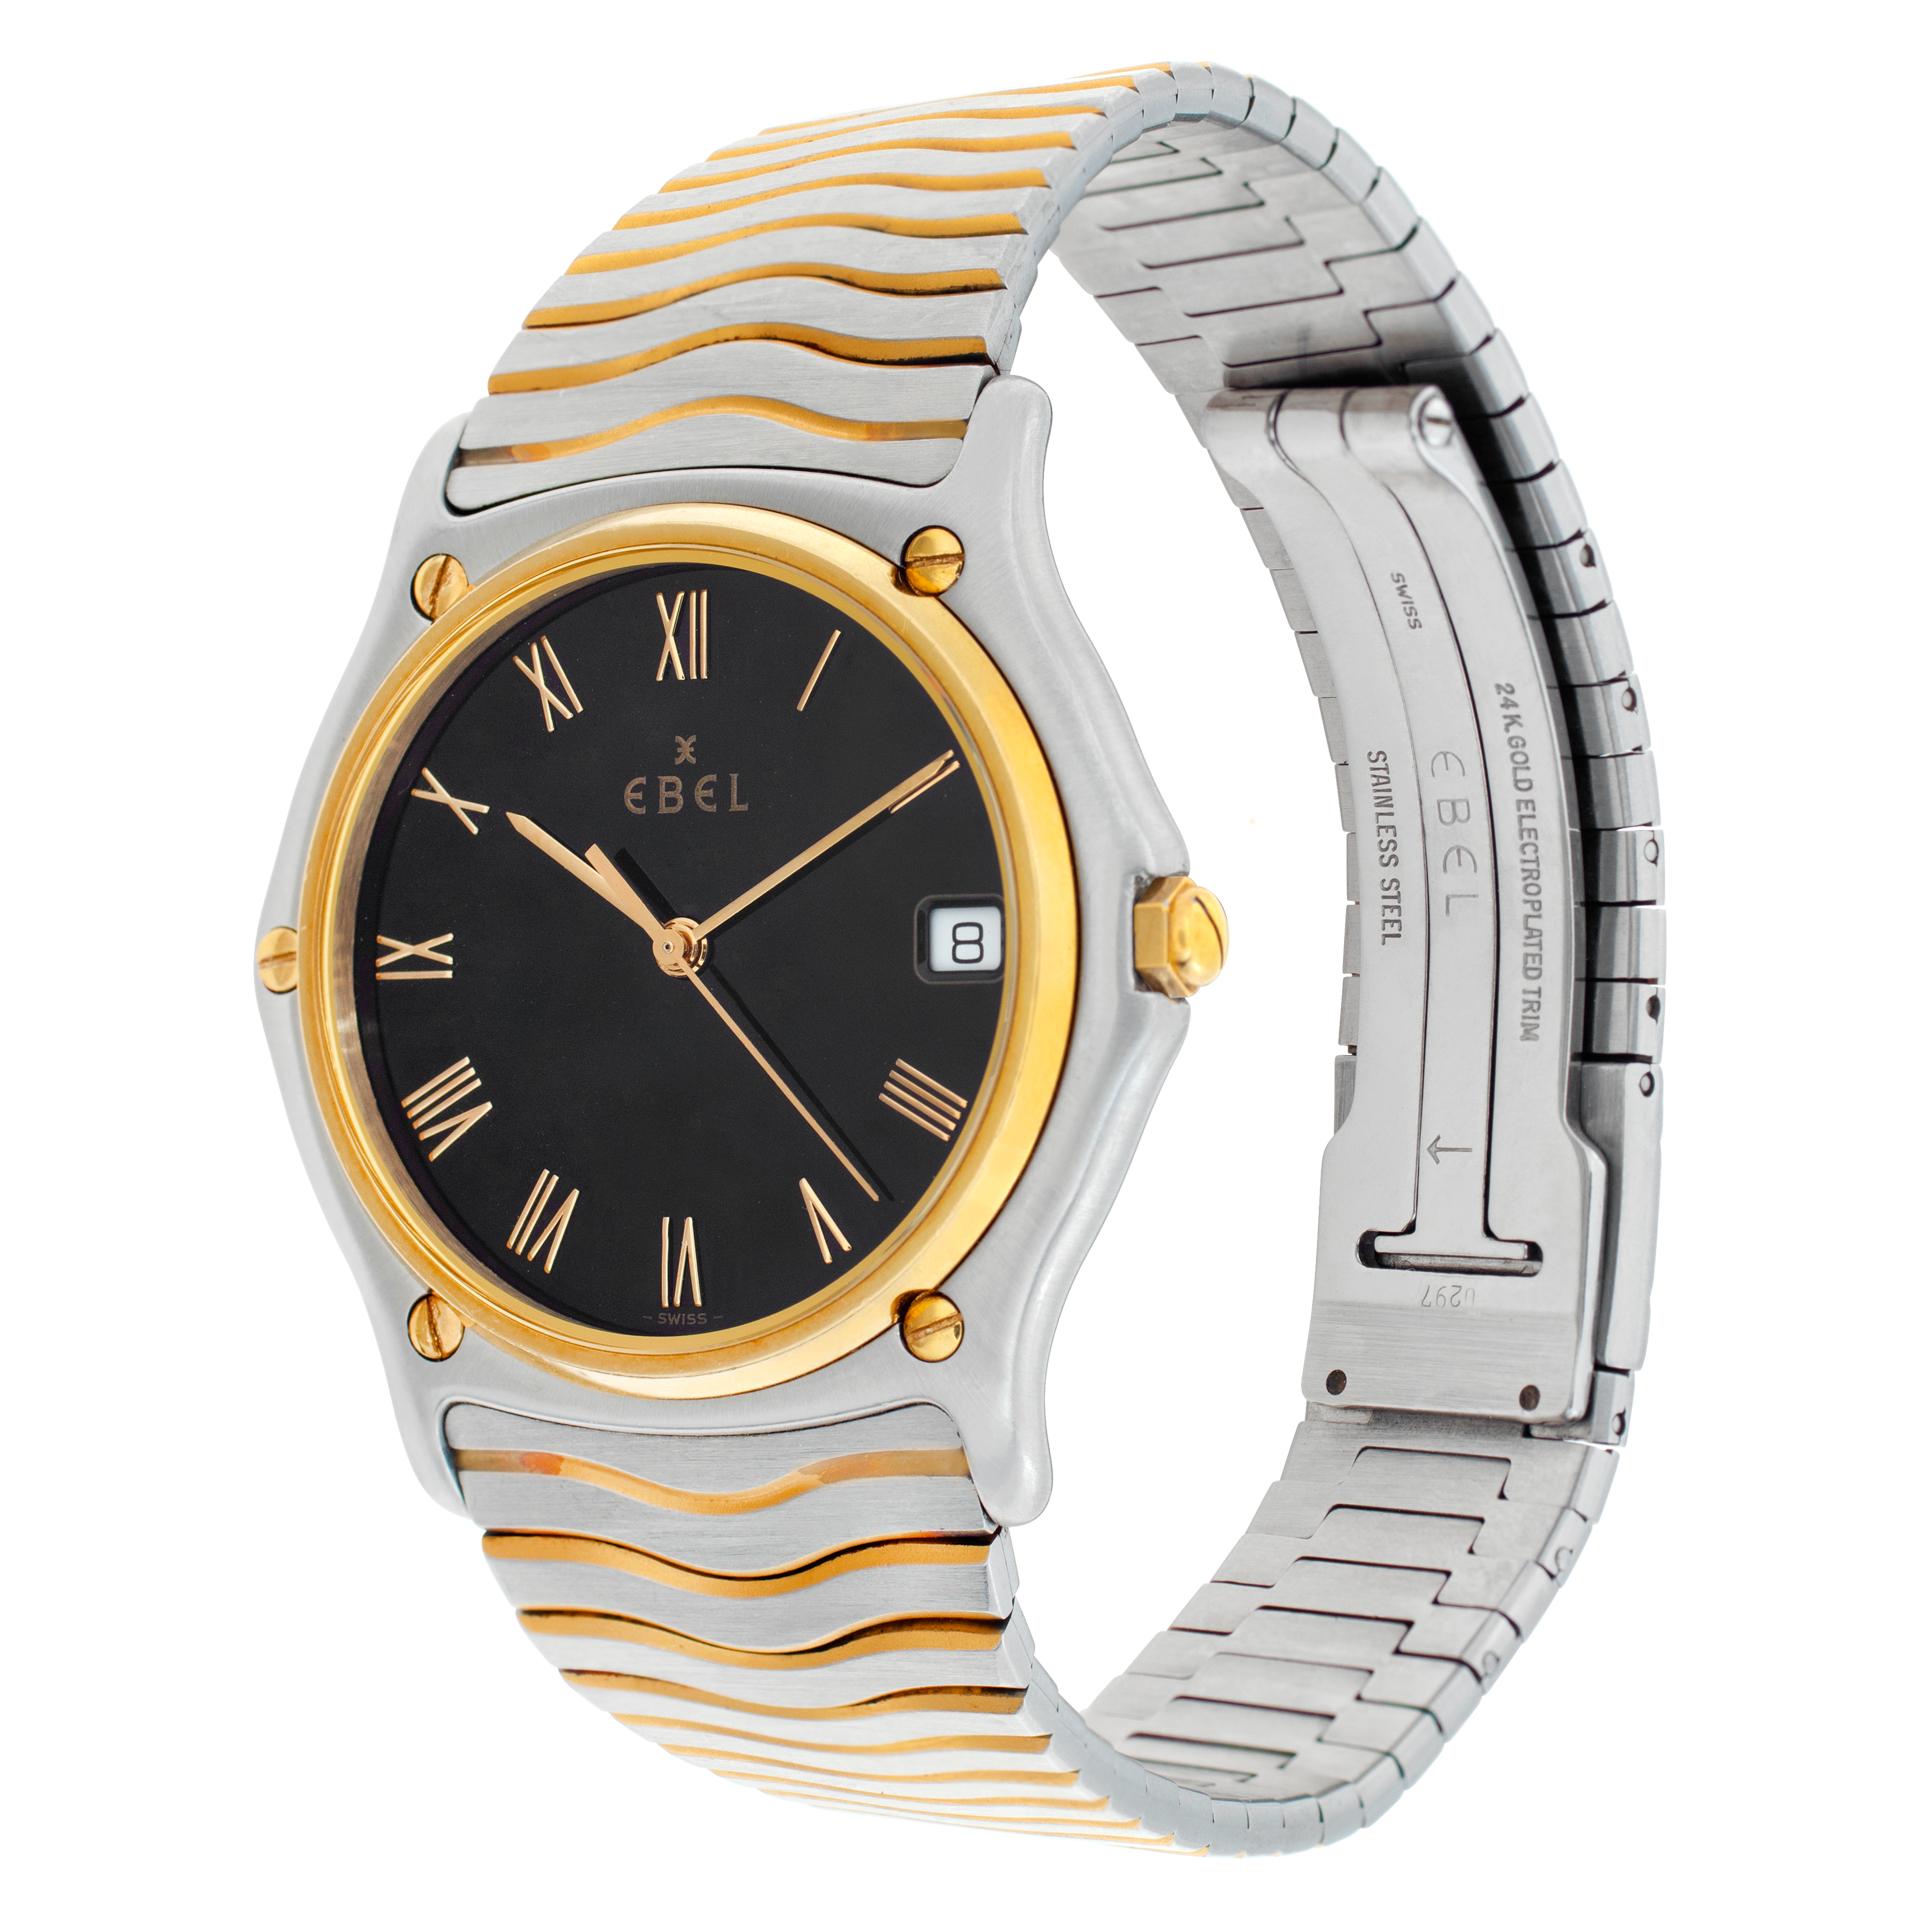 Ebel Sportwave in 18k & stainless steel. Quartz w/ sweep seconds and date. 34 mm case size. Fine Pre-owned Ebel Watch.

 Certified preowned Classic Ebel Sportwave watch is made out of Gold and steel on a 18k & Stainless Steel bracelet with a